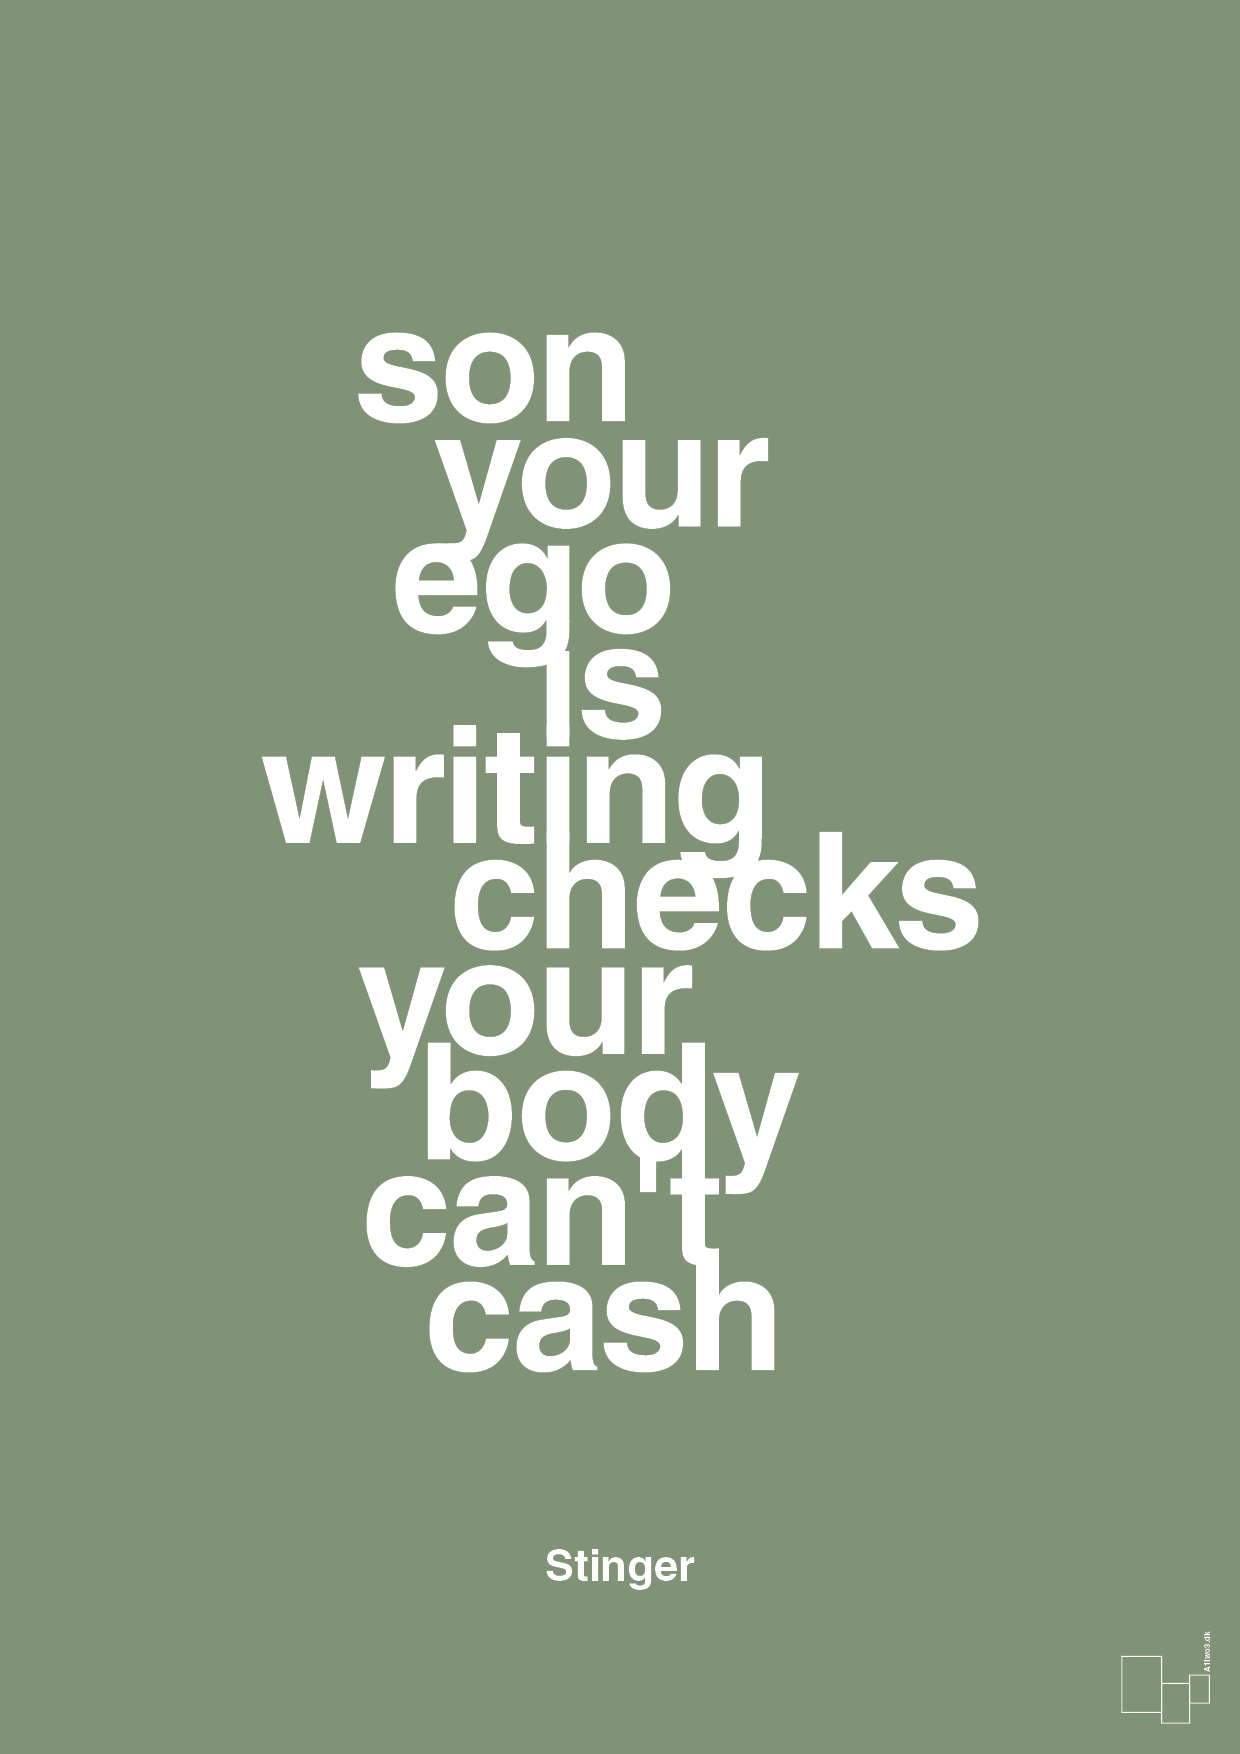 son your ego is writing checks your body can't cash - Plakat med Citater i Jade